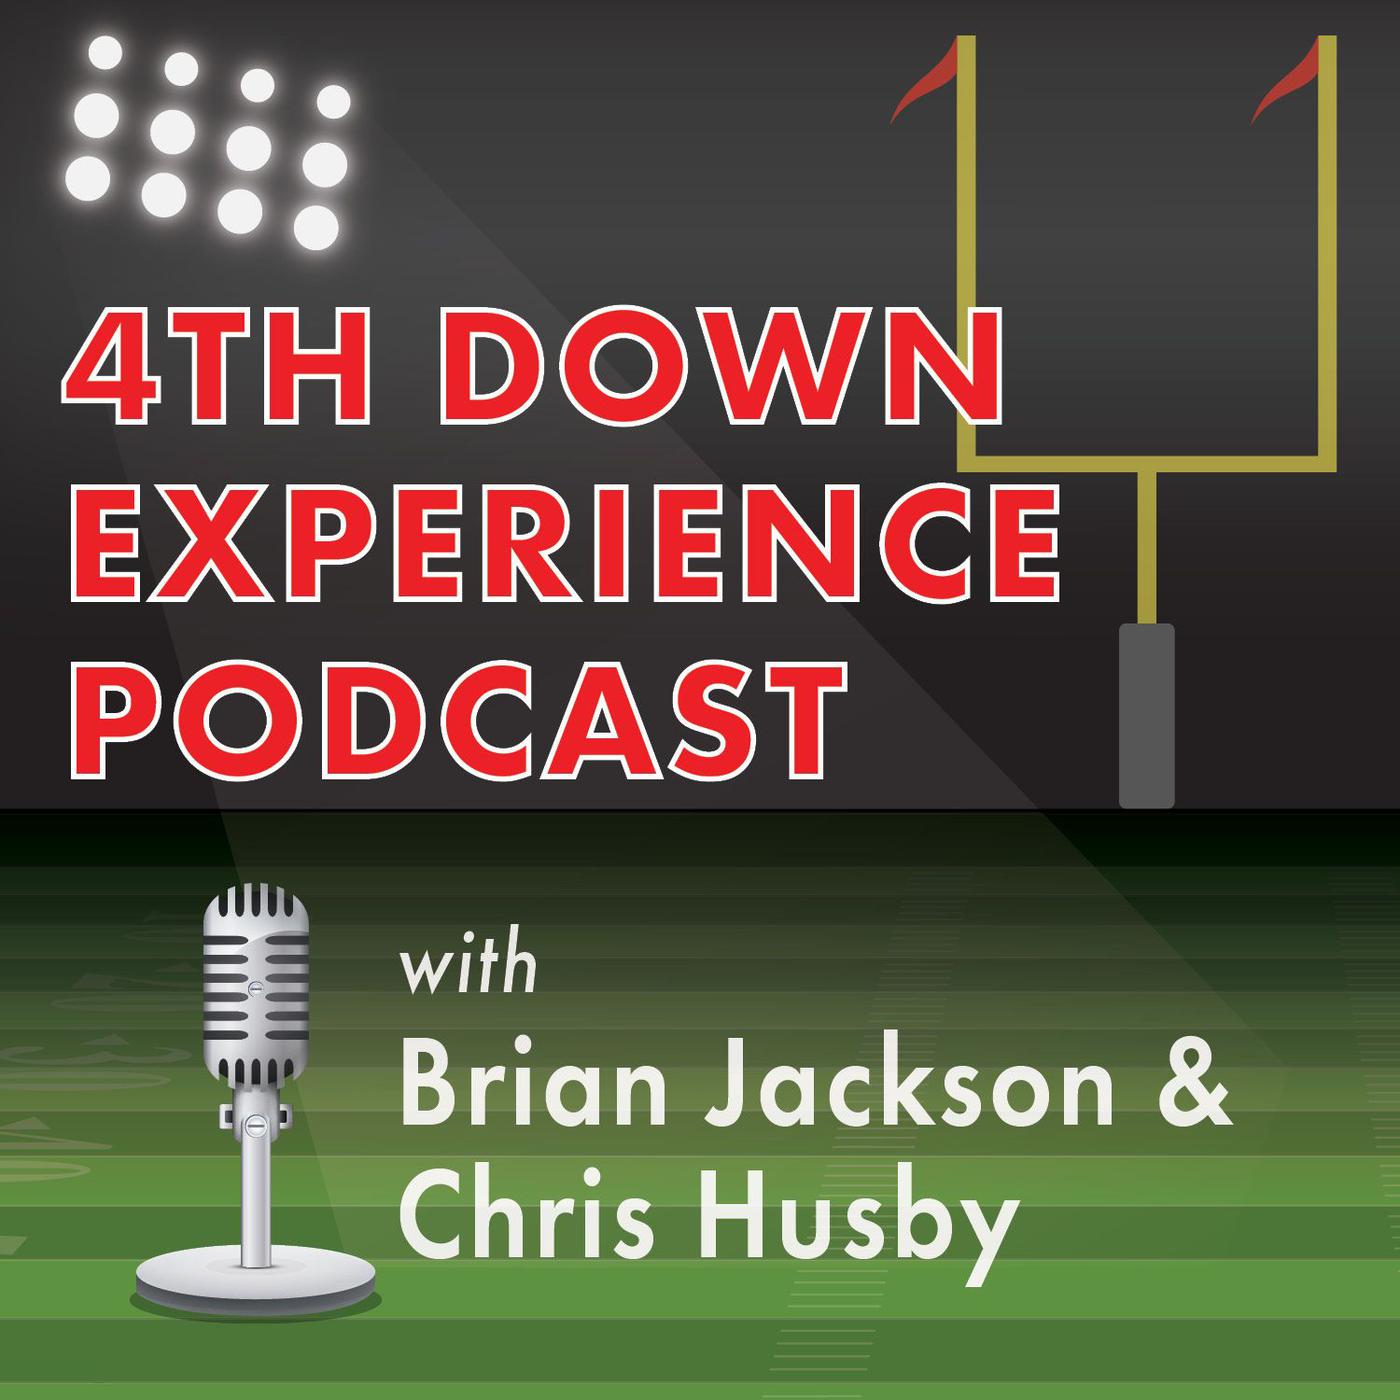 35 Year Old Former Soccer Player Becomes Pro Kicker In 1 Year, Daniel Bowen Talks Journey | Ep 69